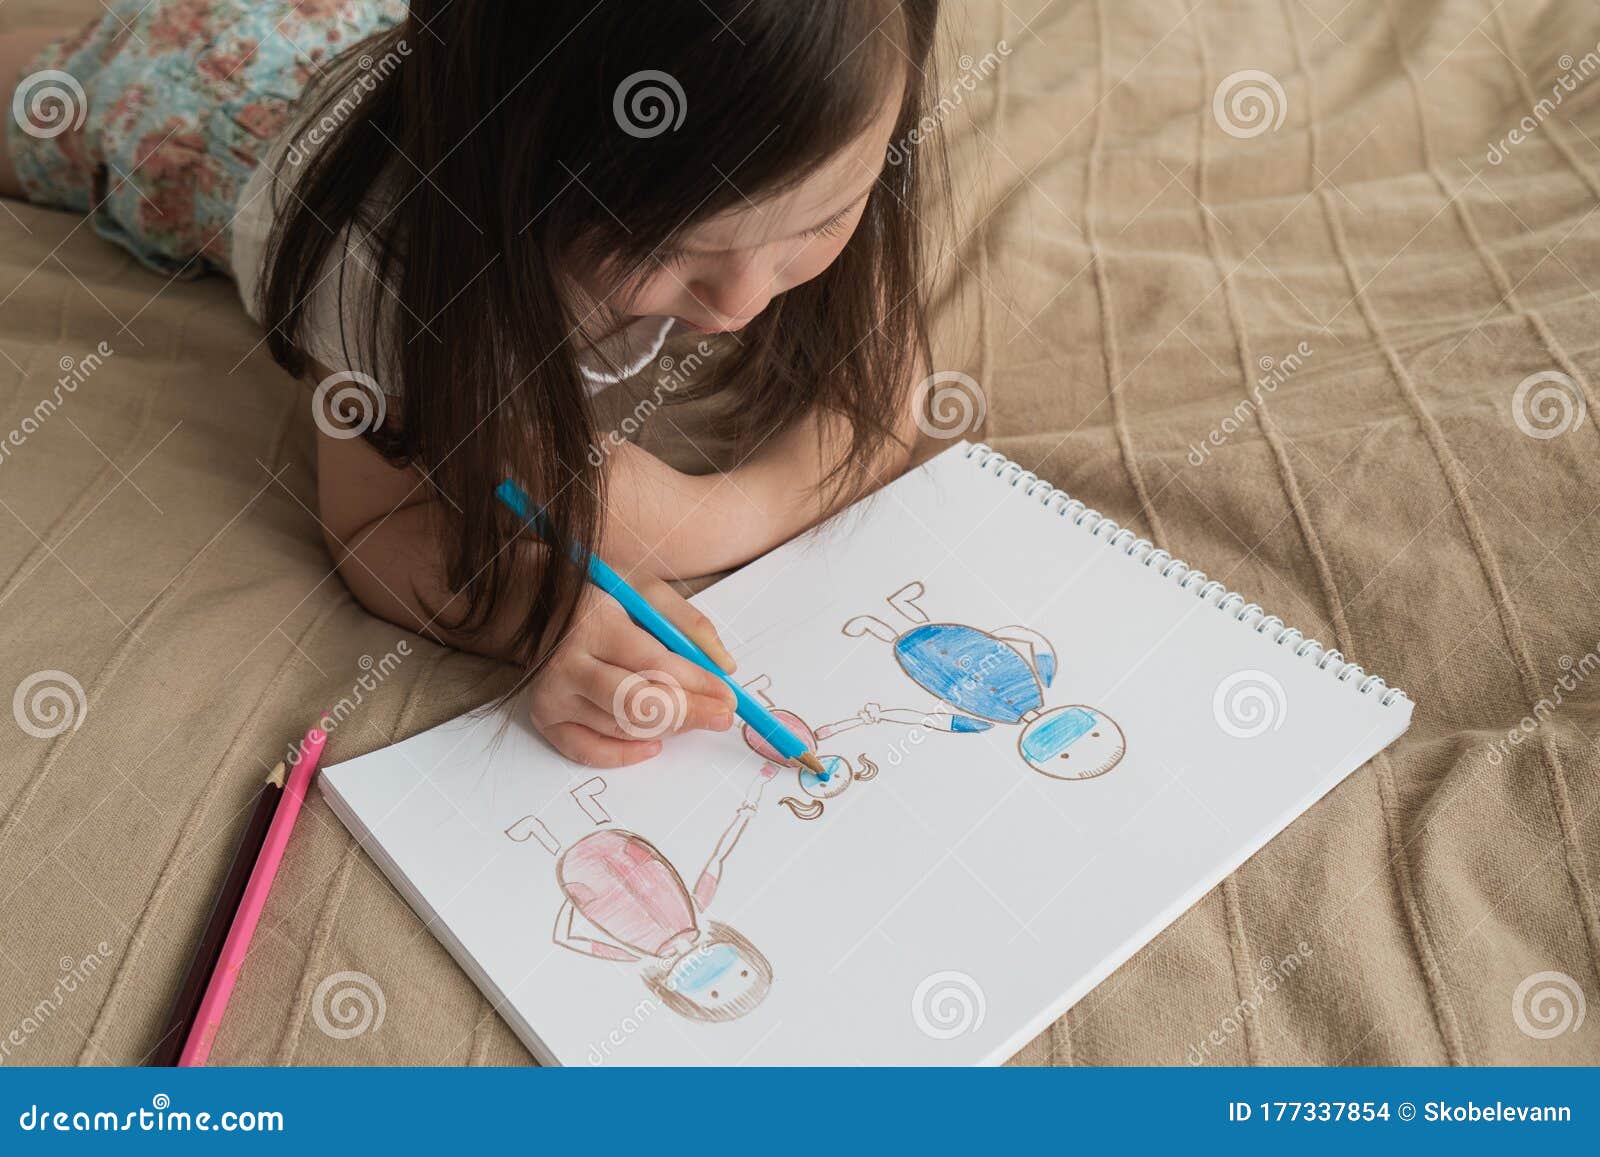 Cute Girl Draws a Pencil Drawing. a Child Learns To Draw People ...